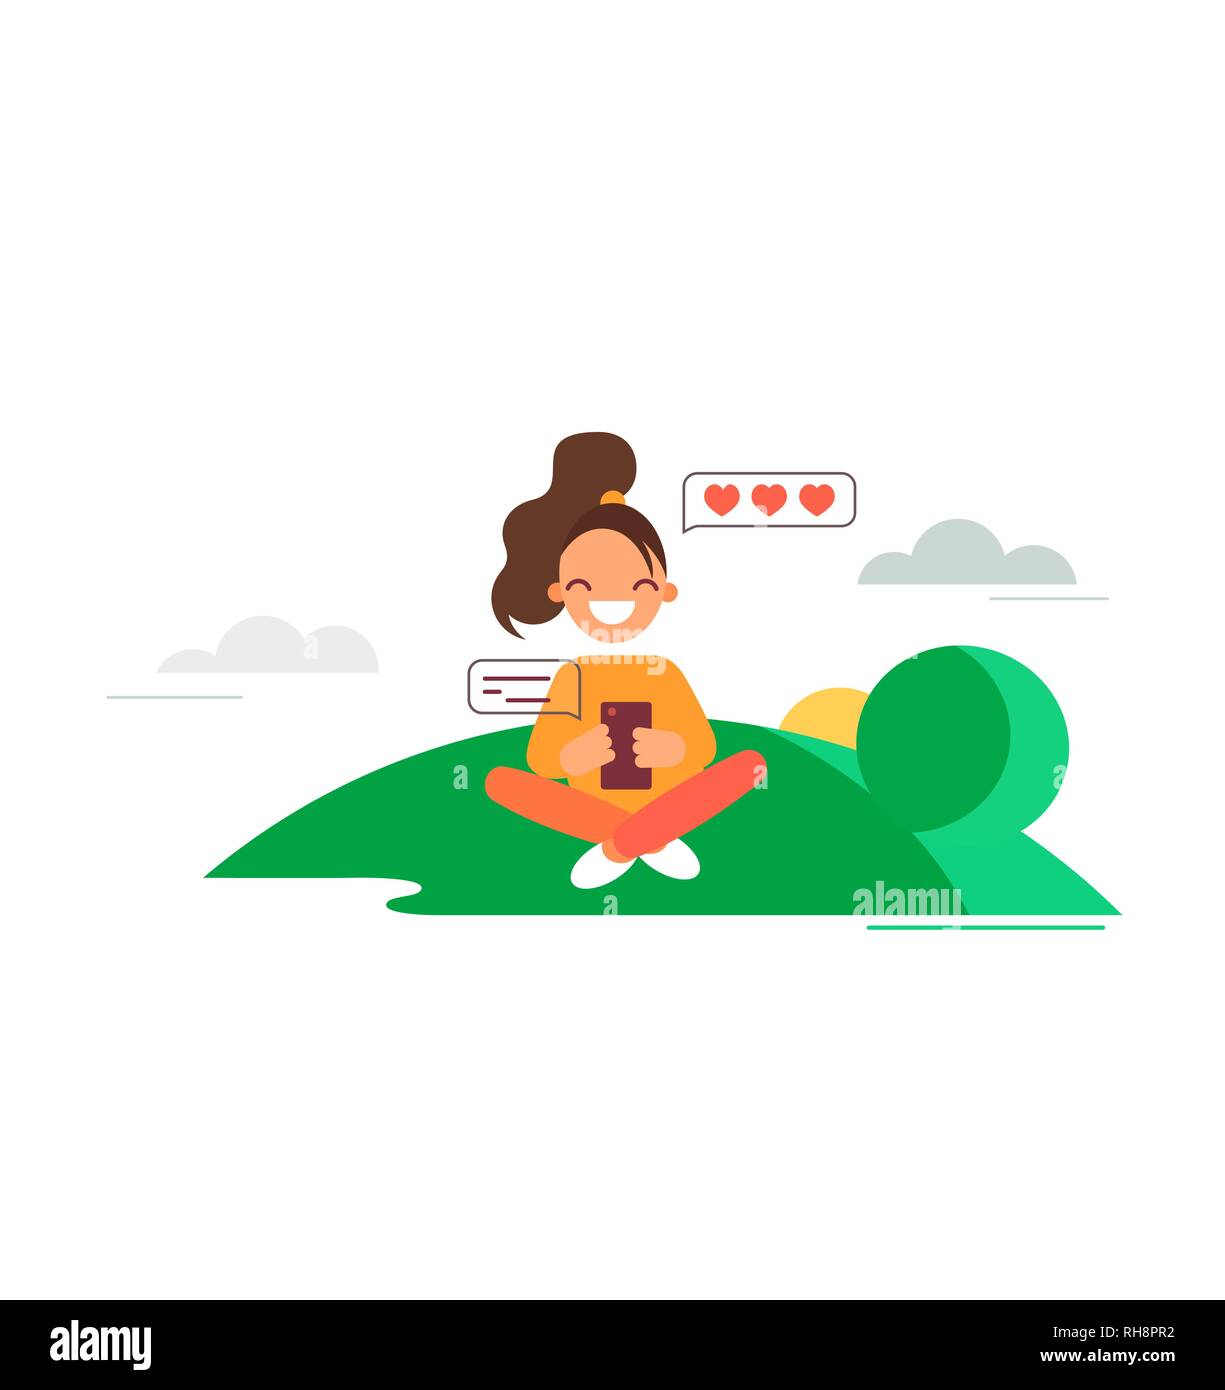 Girl loves chatting. Flat style vector illustration. Young woman seats on lawn and chats with someone she loves. Stock Vector